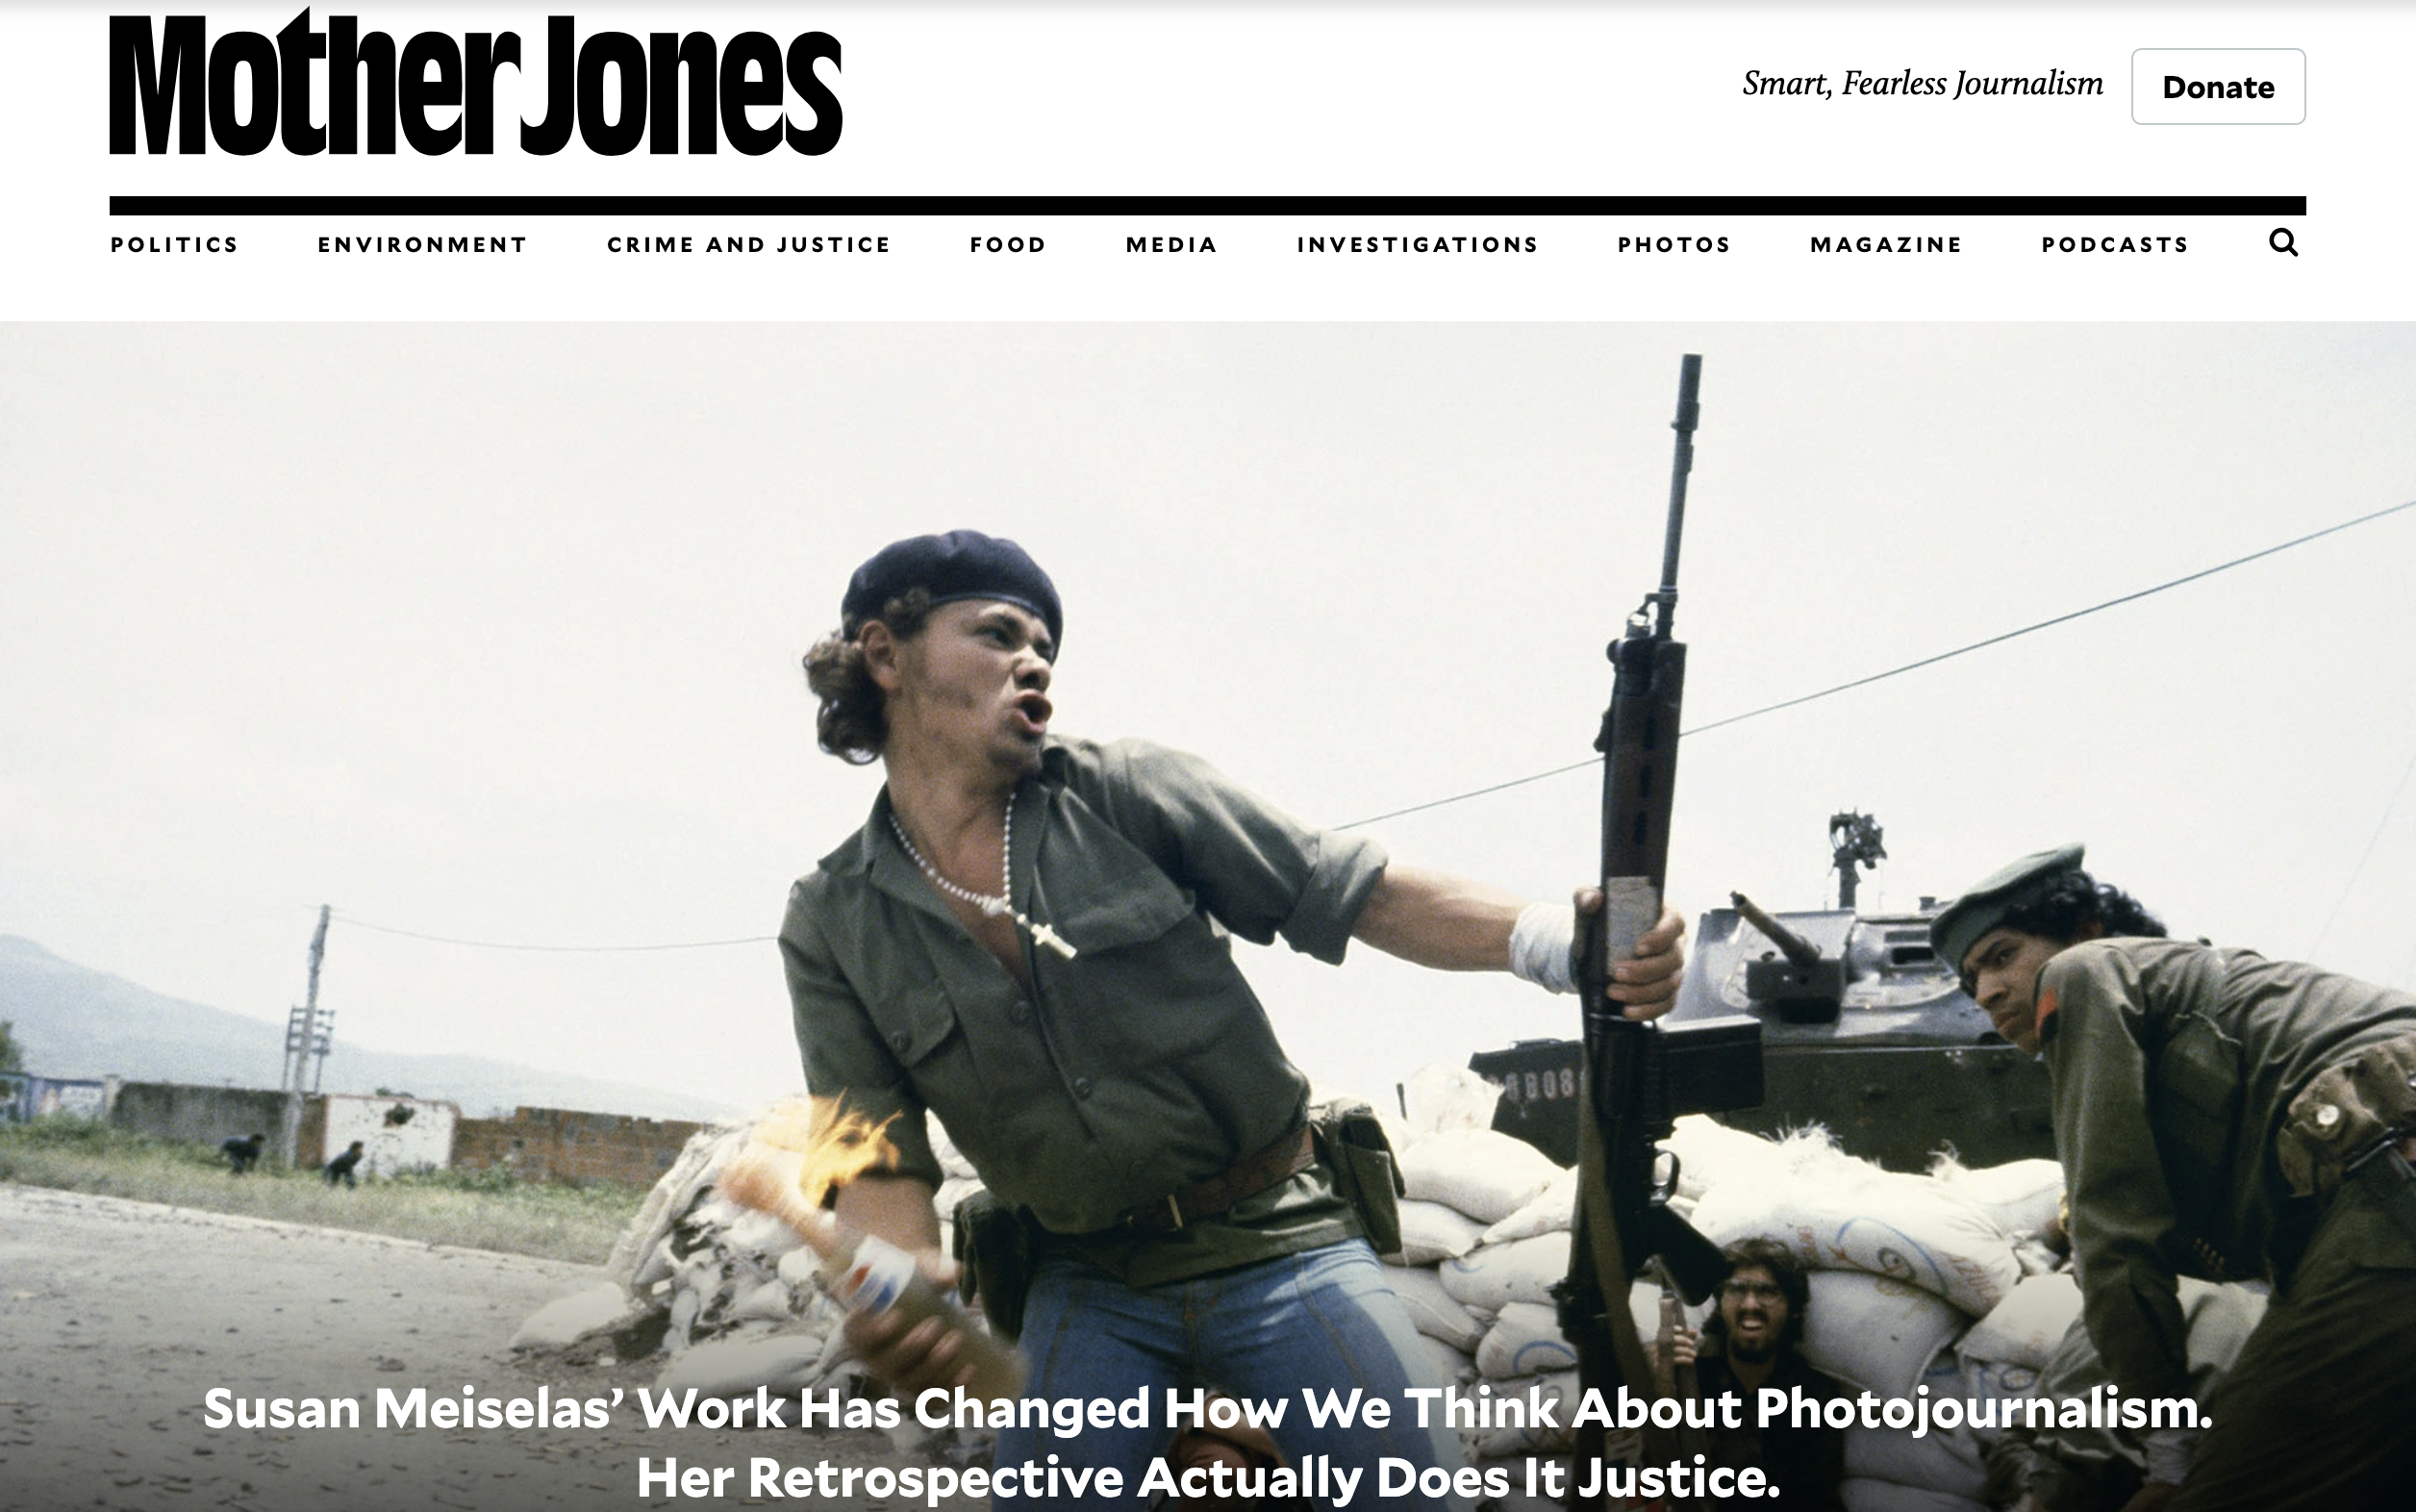 Thumbnail of MotherJones: Susan Meiselas’ Work Has Changed How We Think About Photojournalism. Her Retrospective Actually Does It Justice.